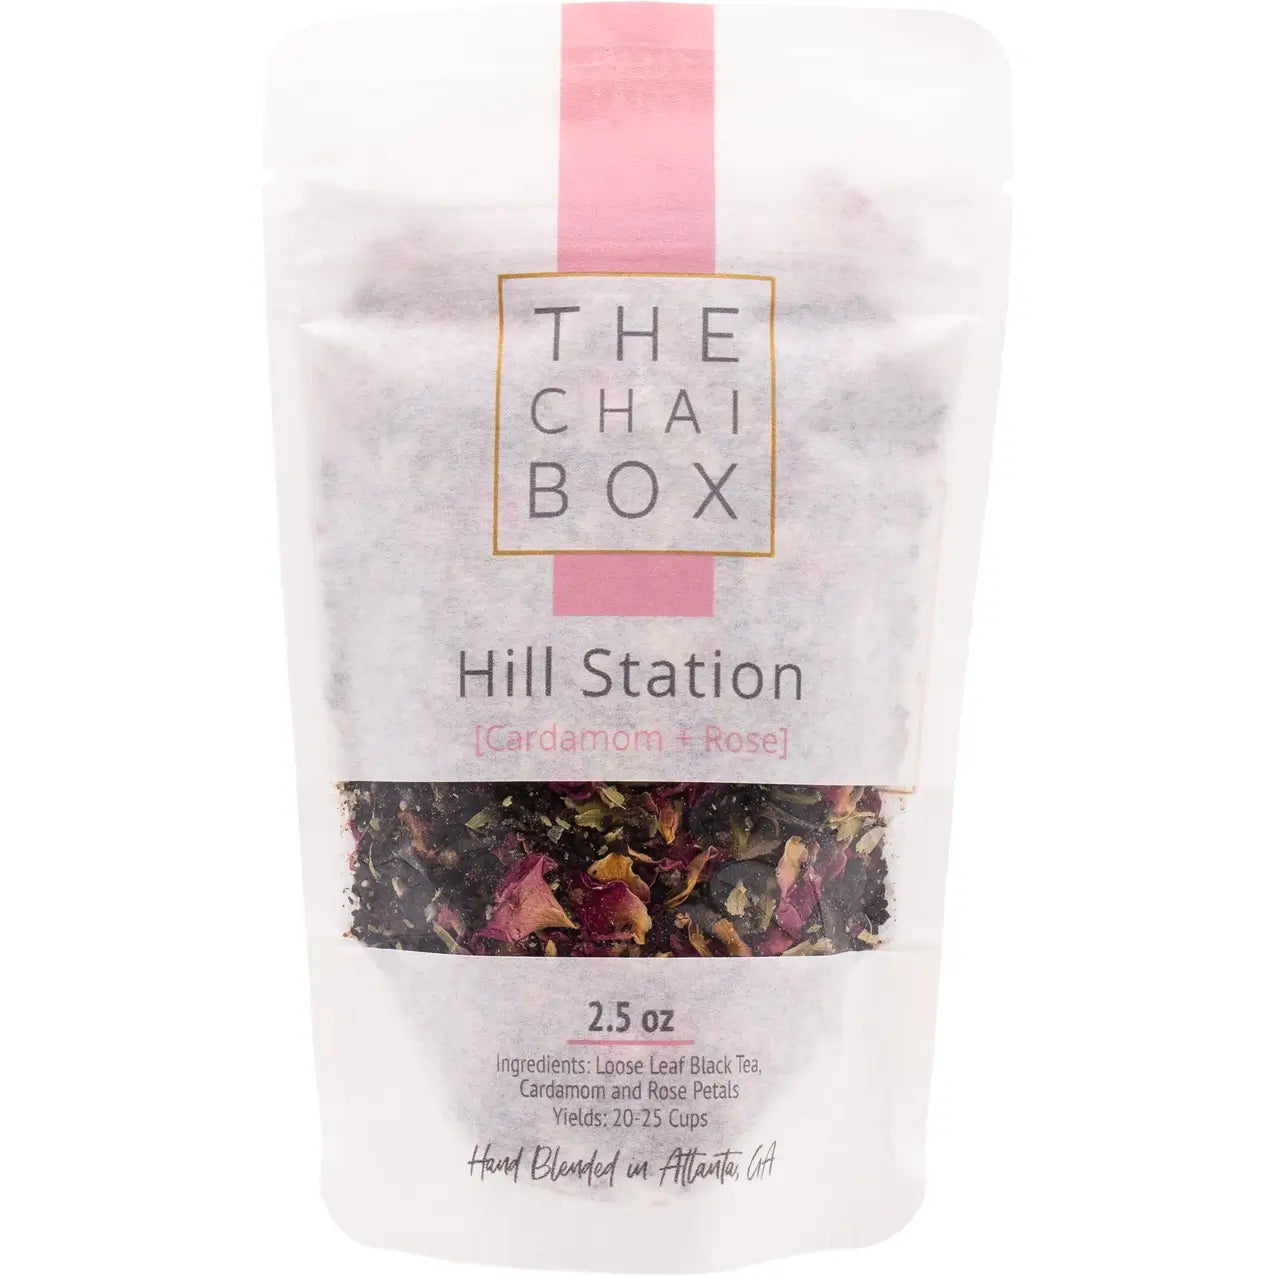 The Chai Box Hill Station in a resealable pouch.